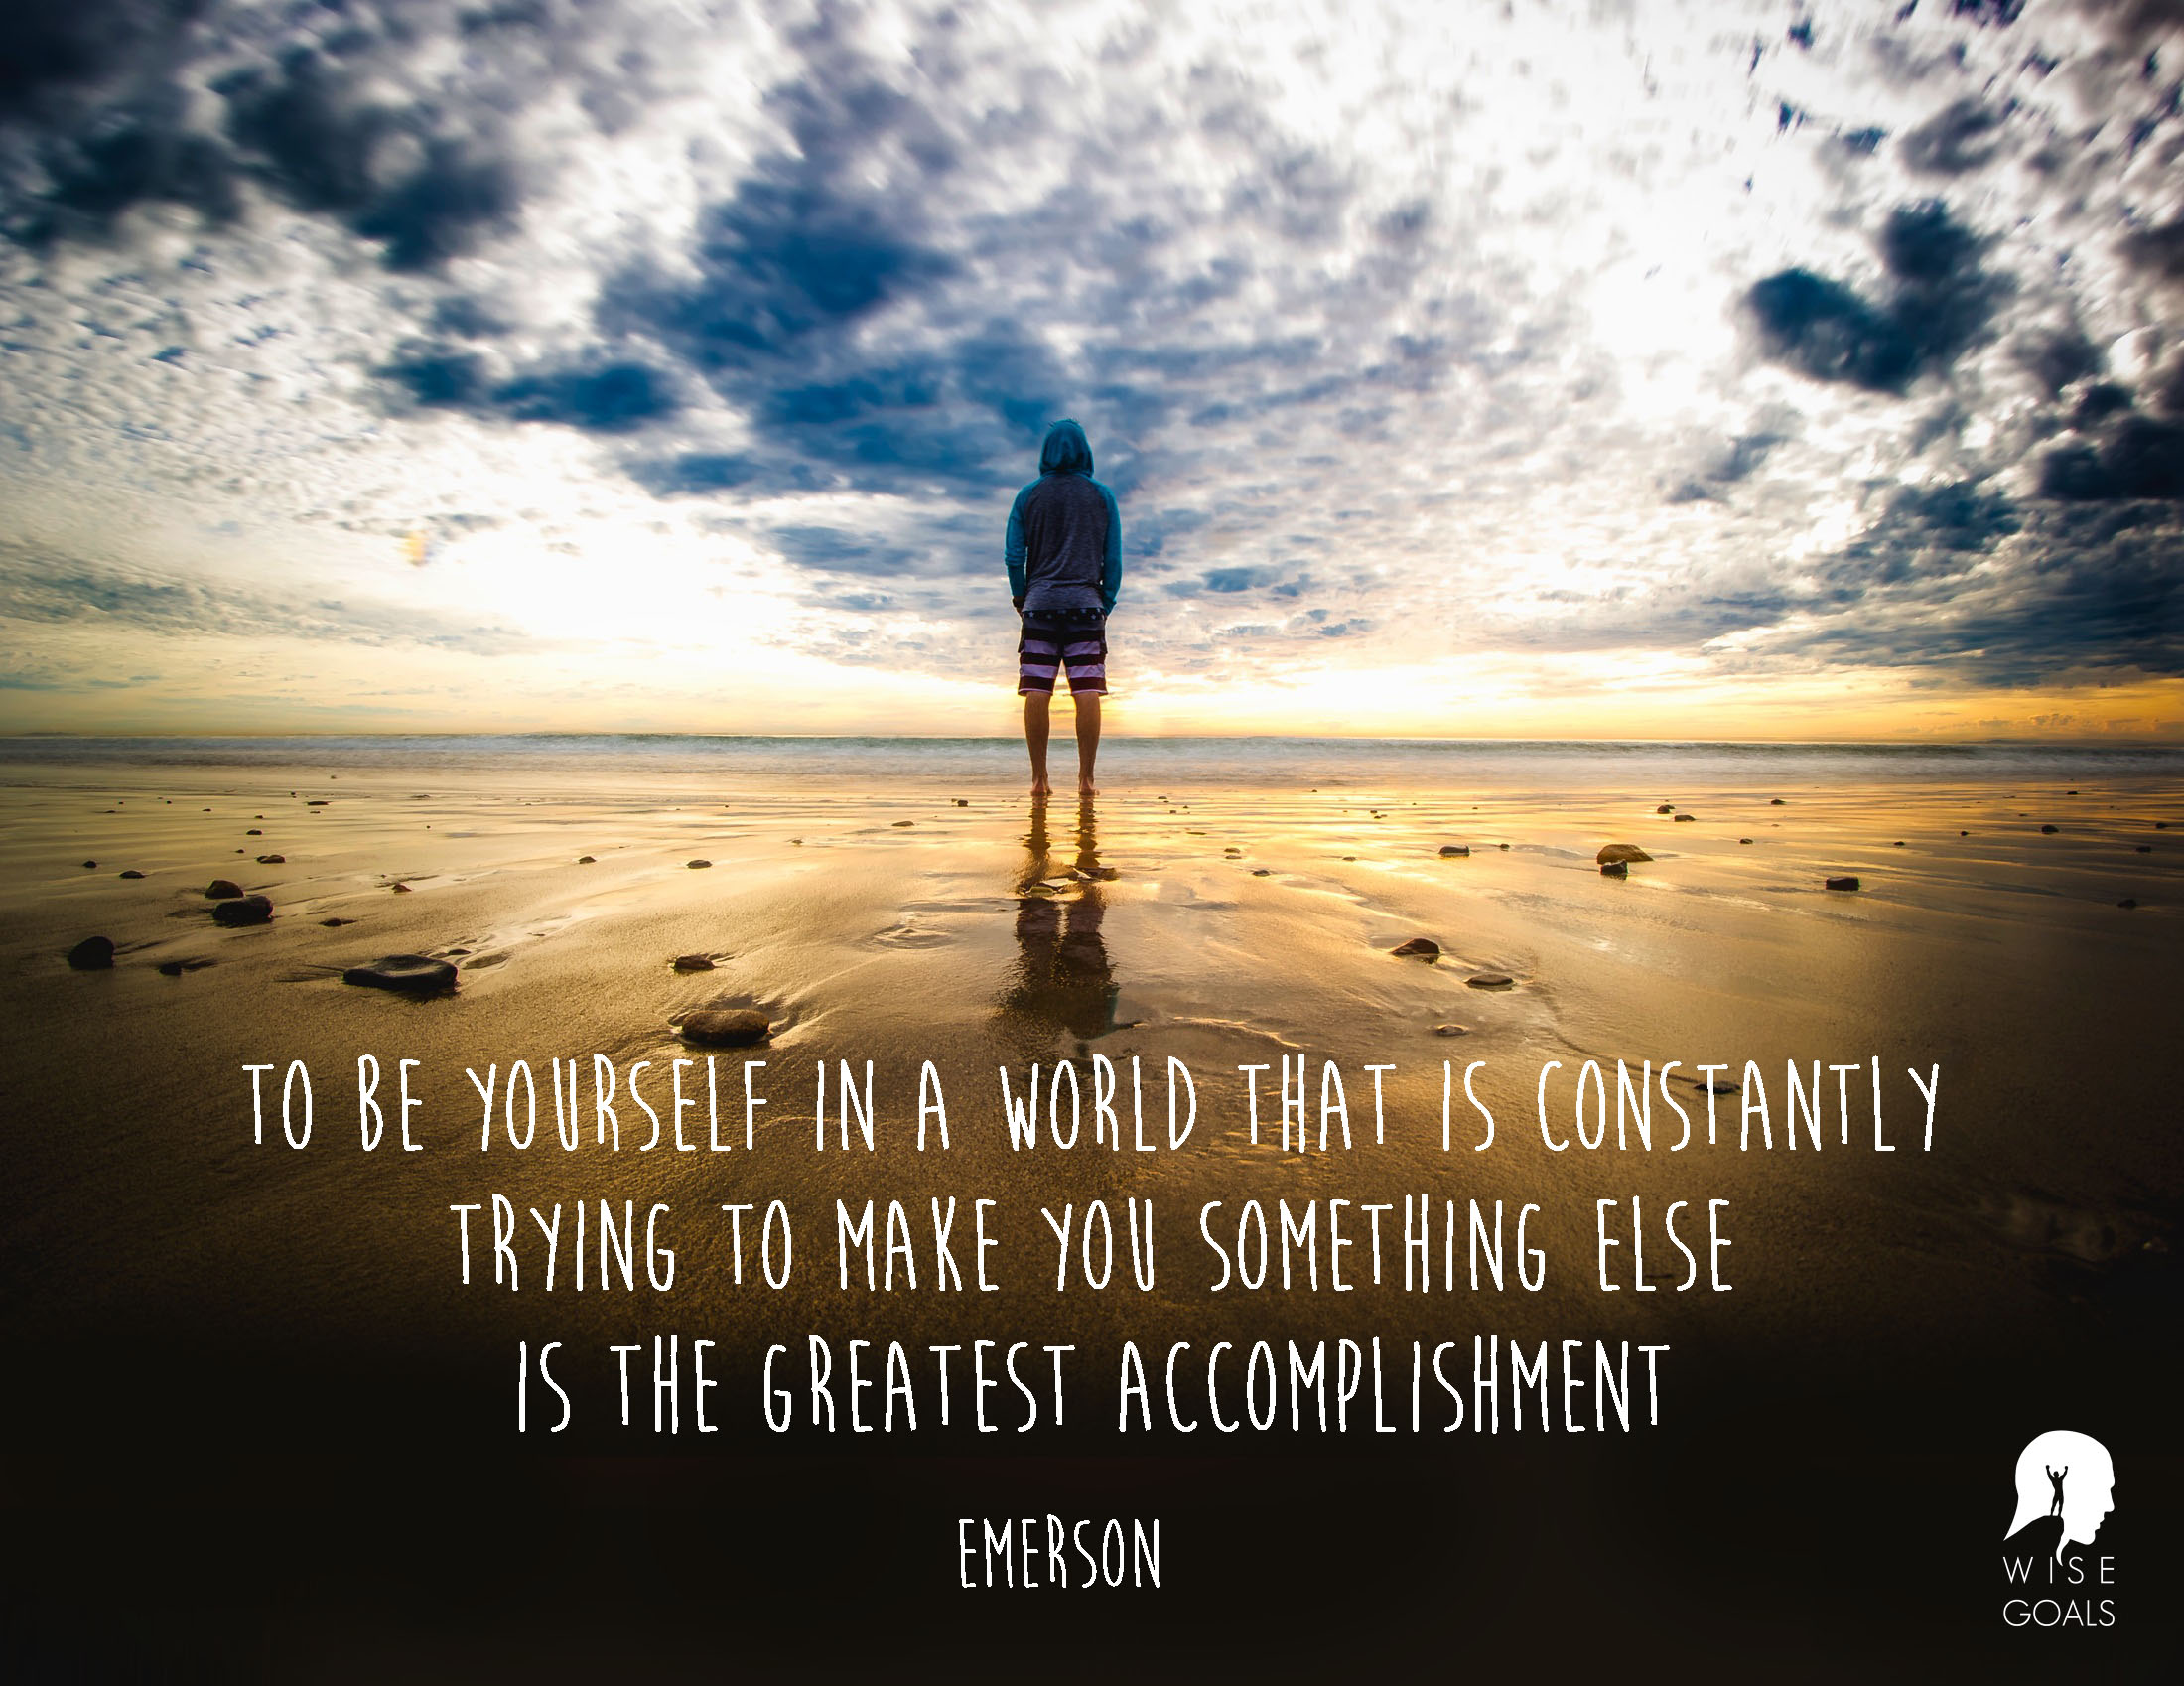 Emerson - to be yourself in a world that is constantly trying to make you something else is the greatest accomplishmentquote